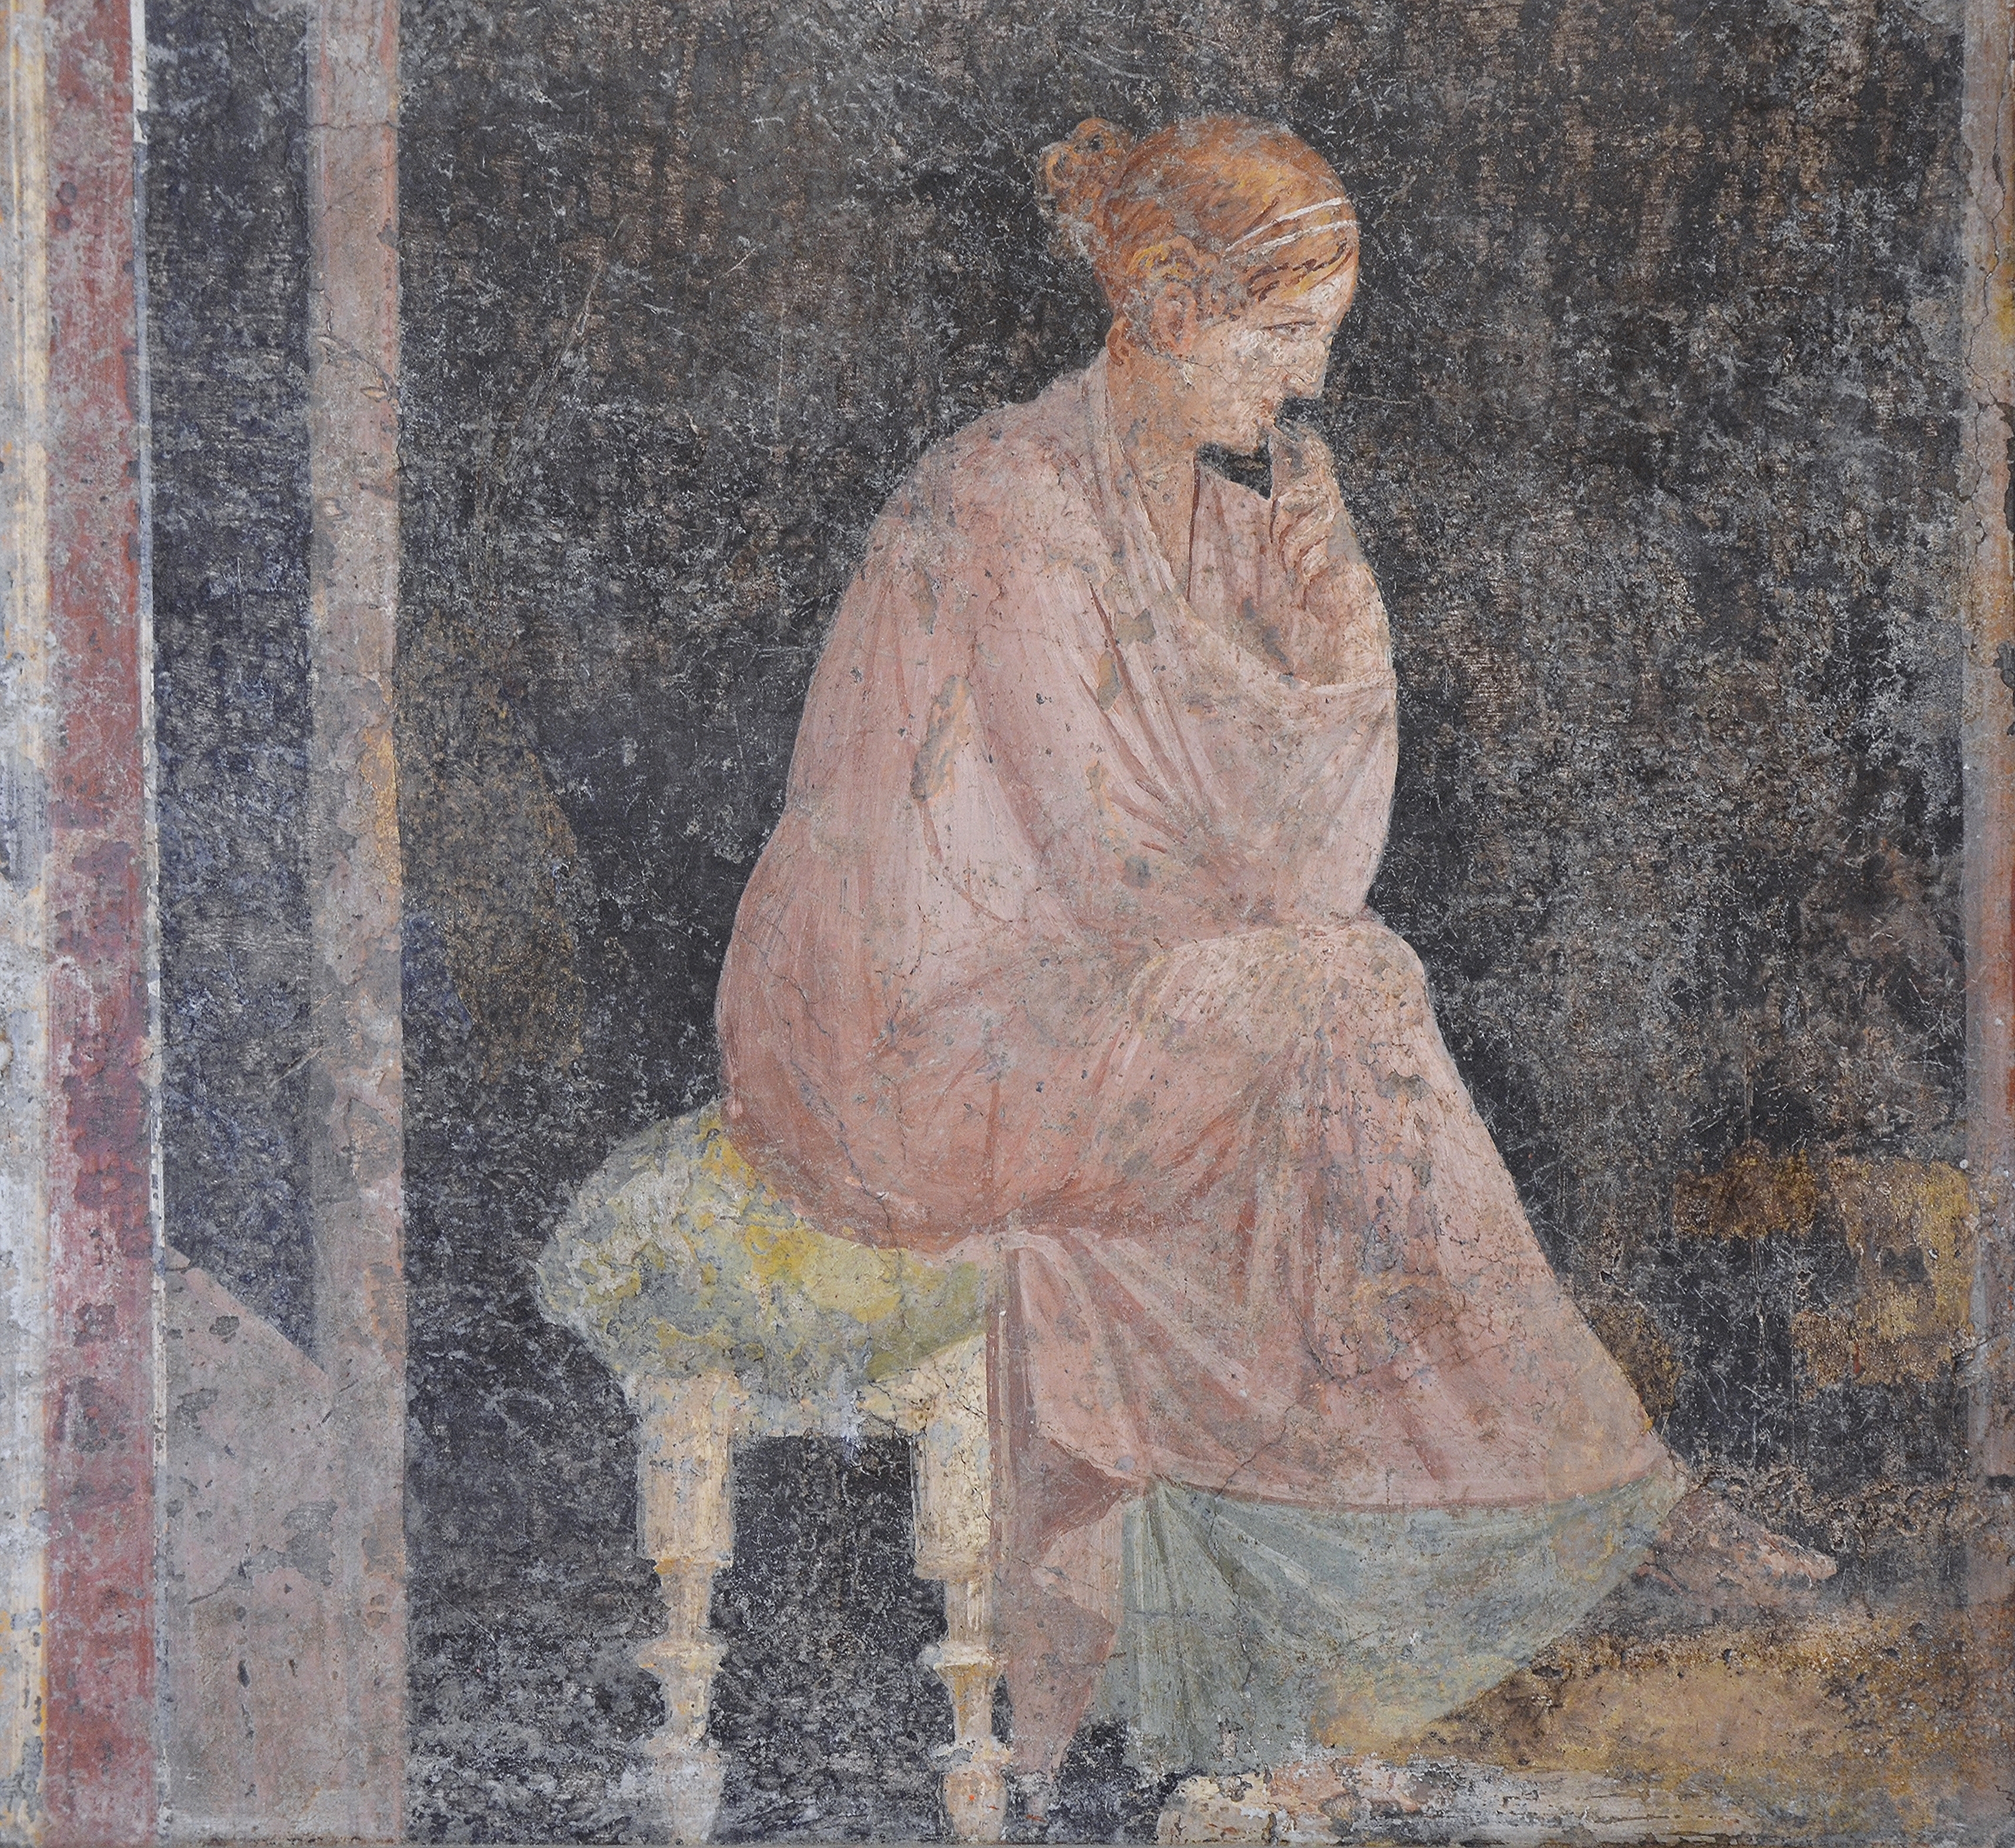 Fresco_depicting_a_seated_woman,_from_the_Villa_Arianna_at_Stabiae,_Naples_National_Archaeological_Museum_(17393152265).jpg